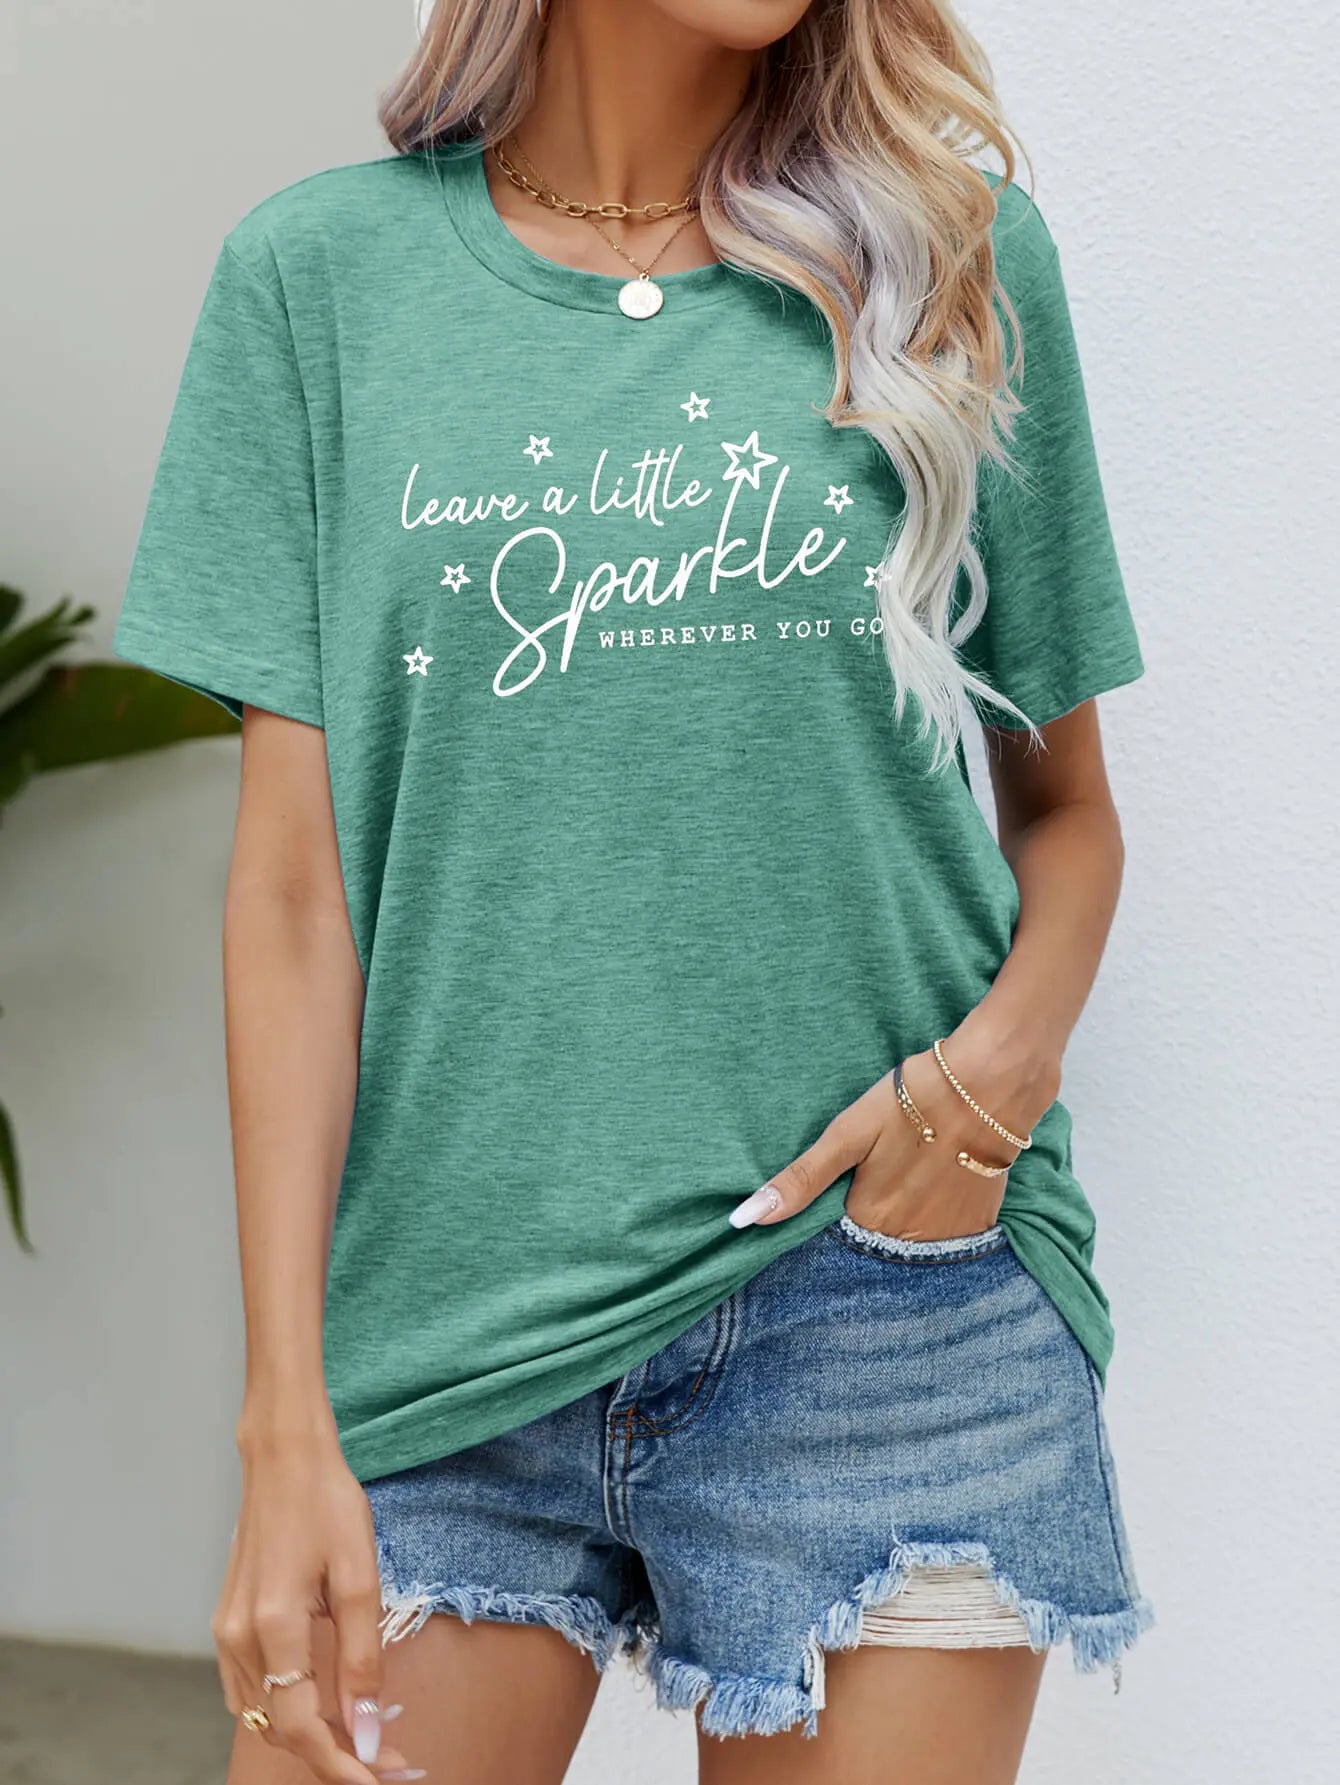 LEAVE A LITTLE SPARKLE WHEREVER YOU GO Tee Shirt - Image #4